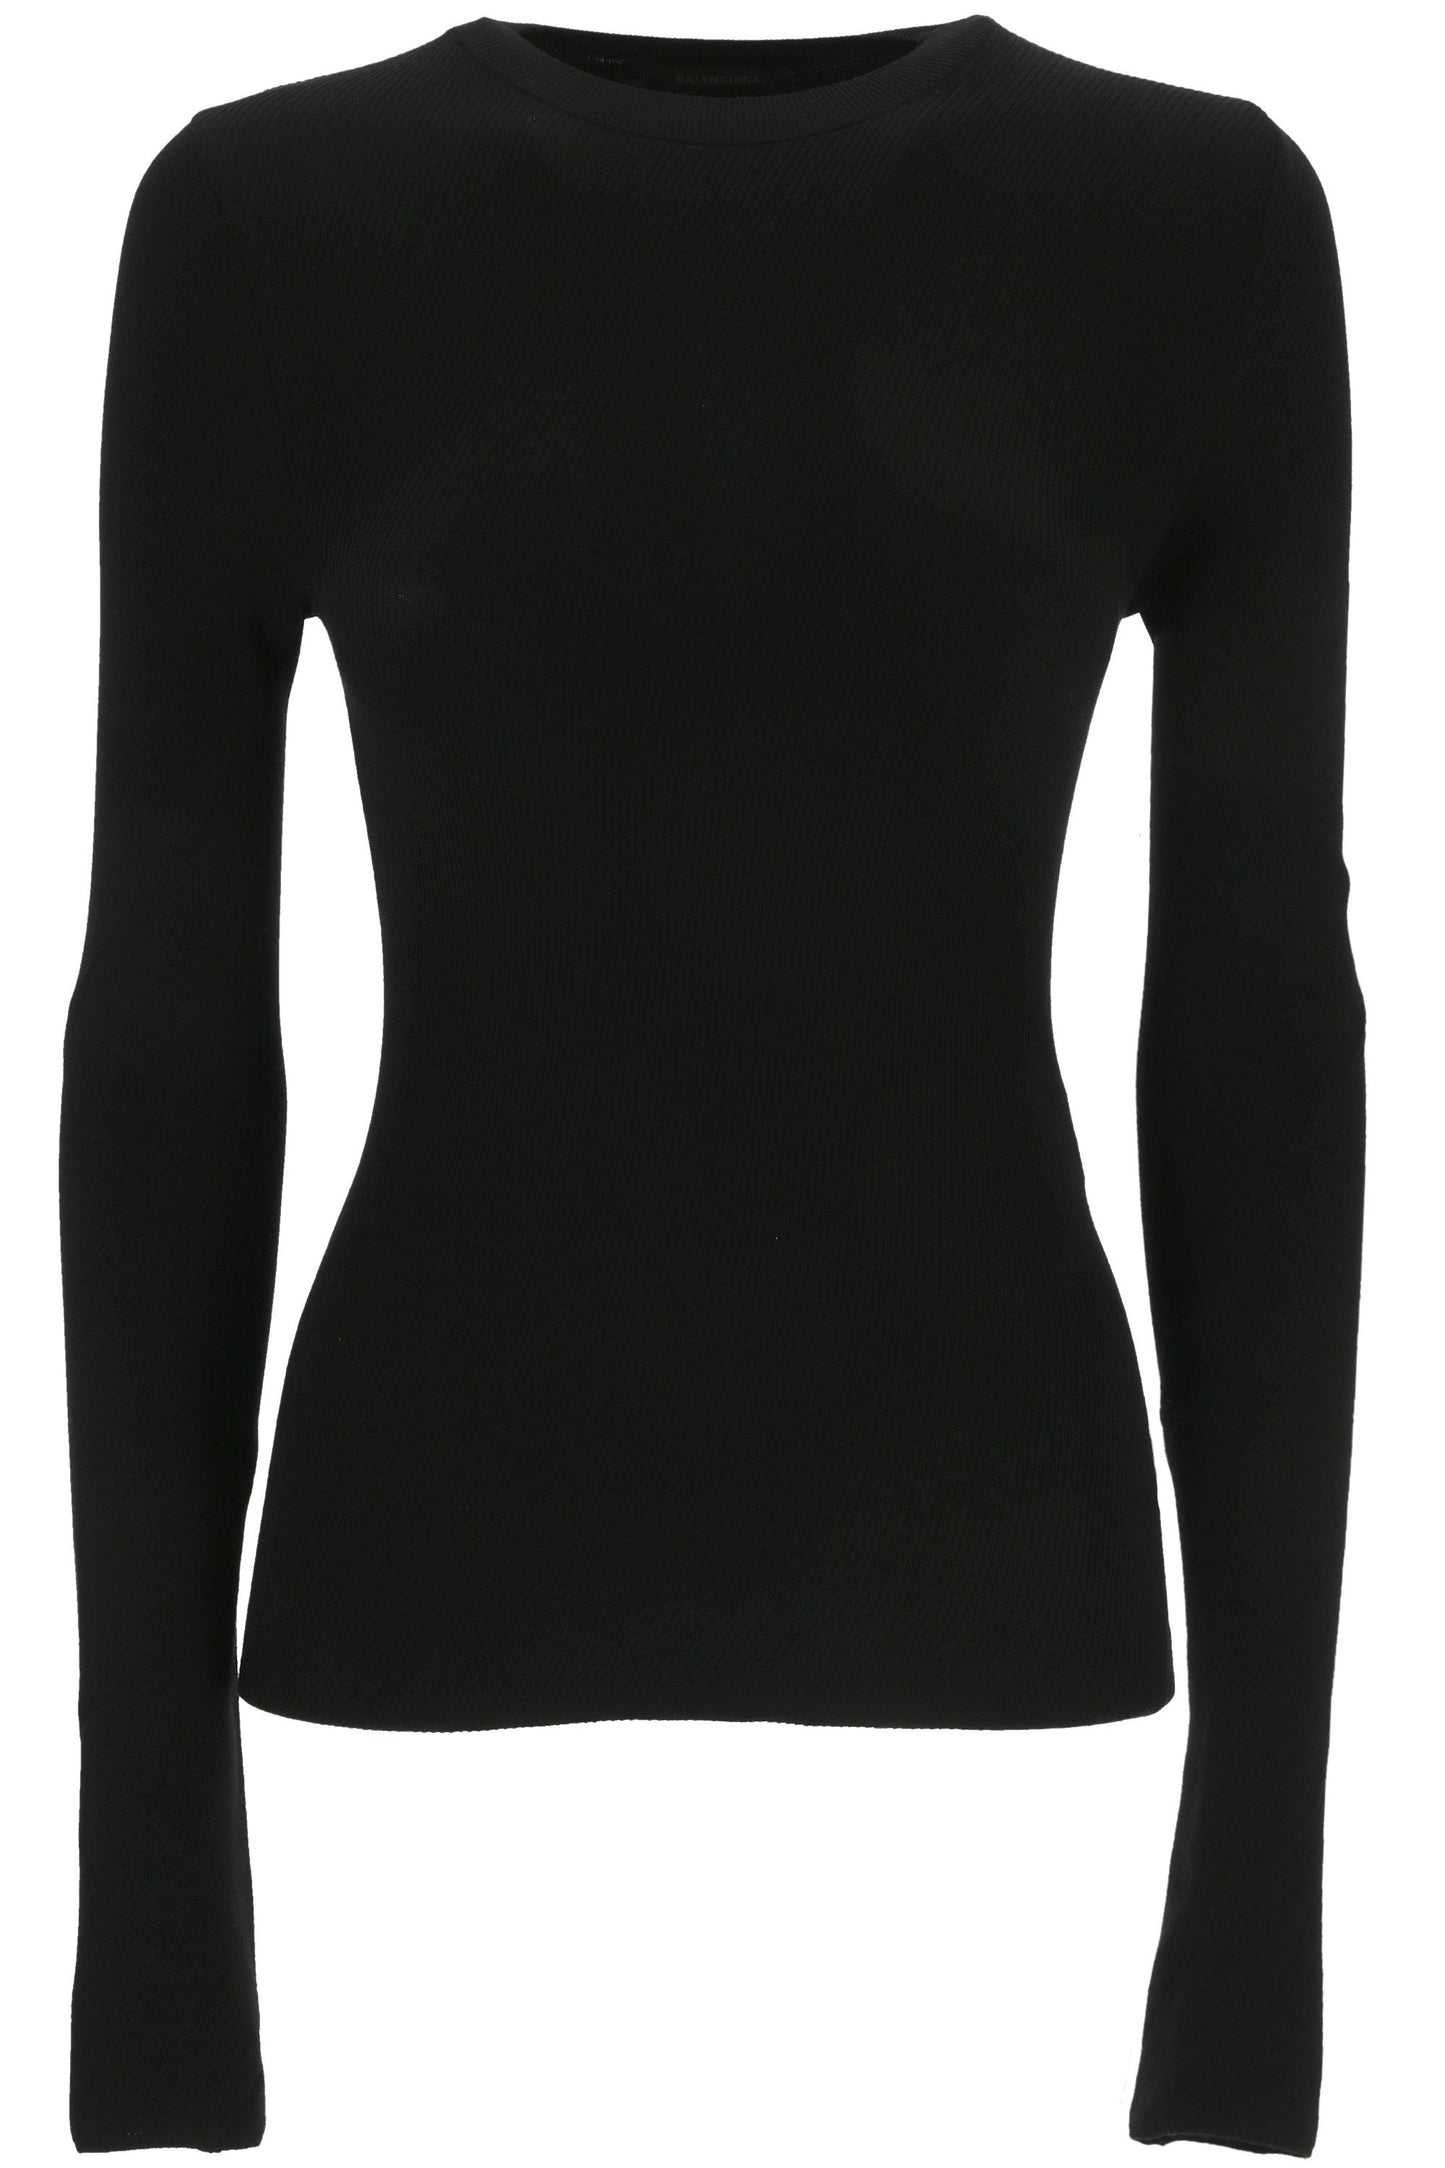 Twisted top in black cotton knit